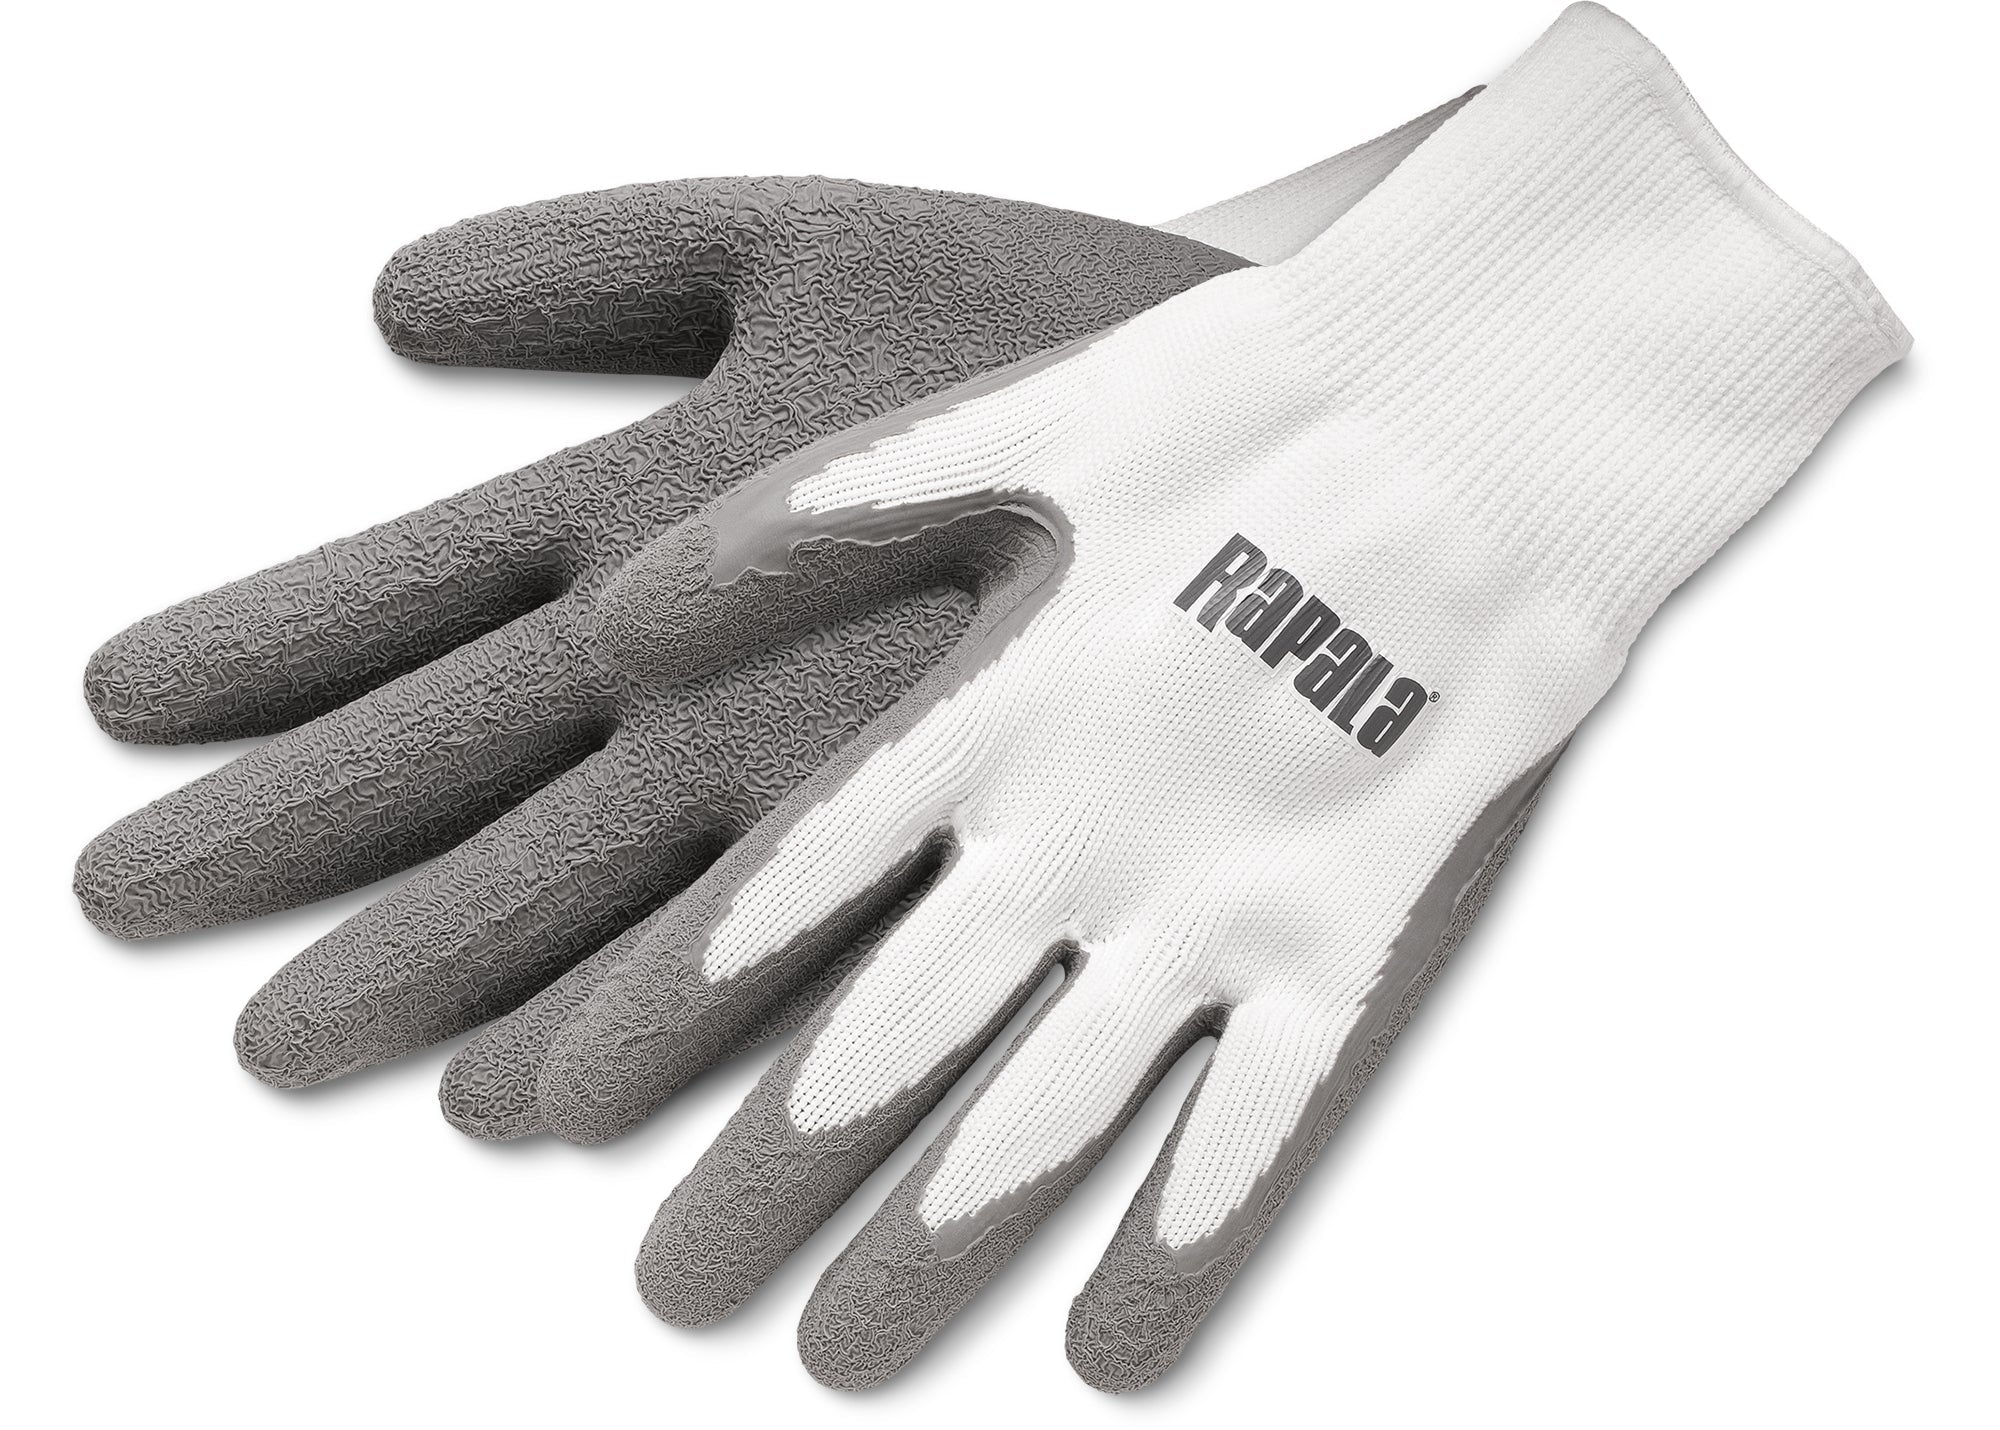 AFTCO Hydronaut Fishing Gloves